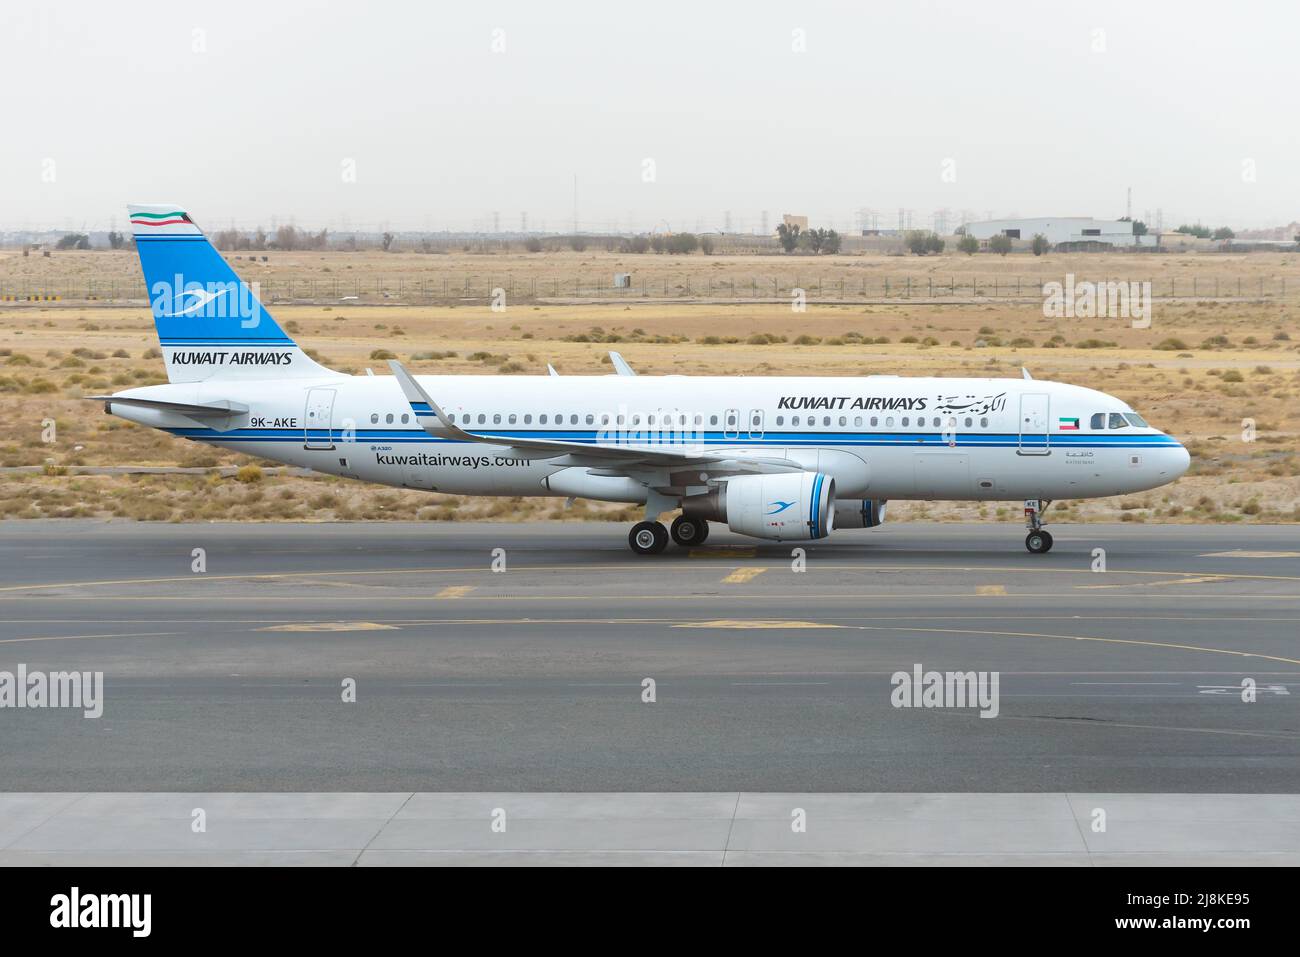 Kuwait Airways Airbus A320 aircraft at Kuwait Airport. Aiplane of Kuwait Airways with old livery. Stock Photo